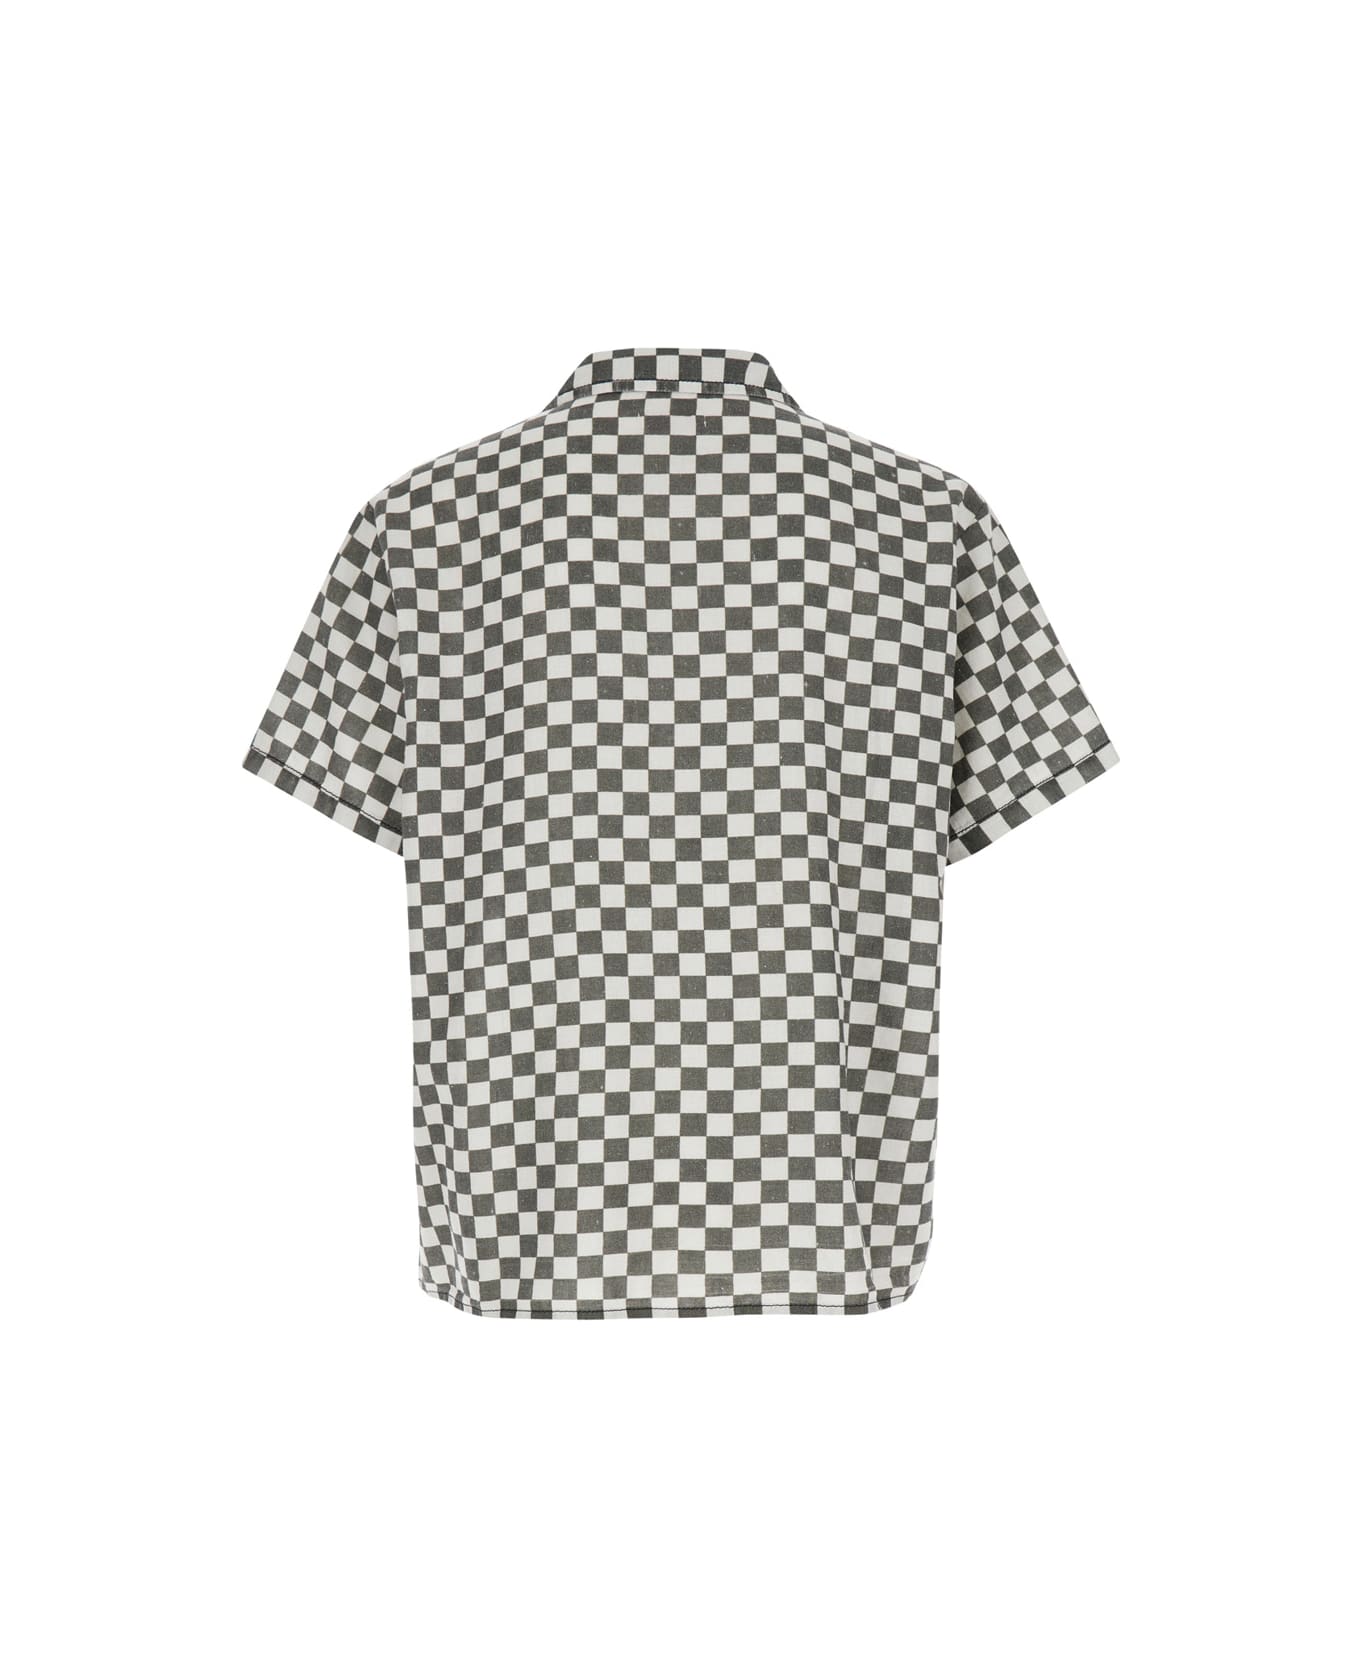 ERL Black And White Bowling Shirt With Check Motif In Cotton And Linen Man - Grey